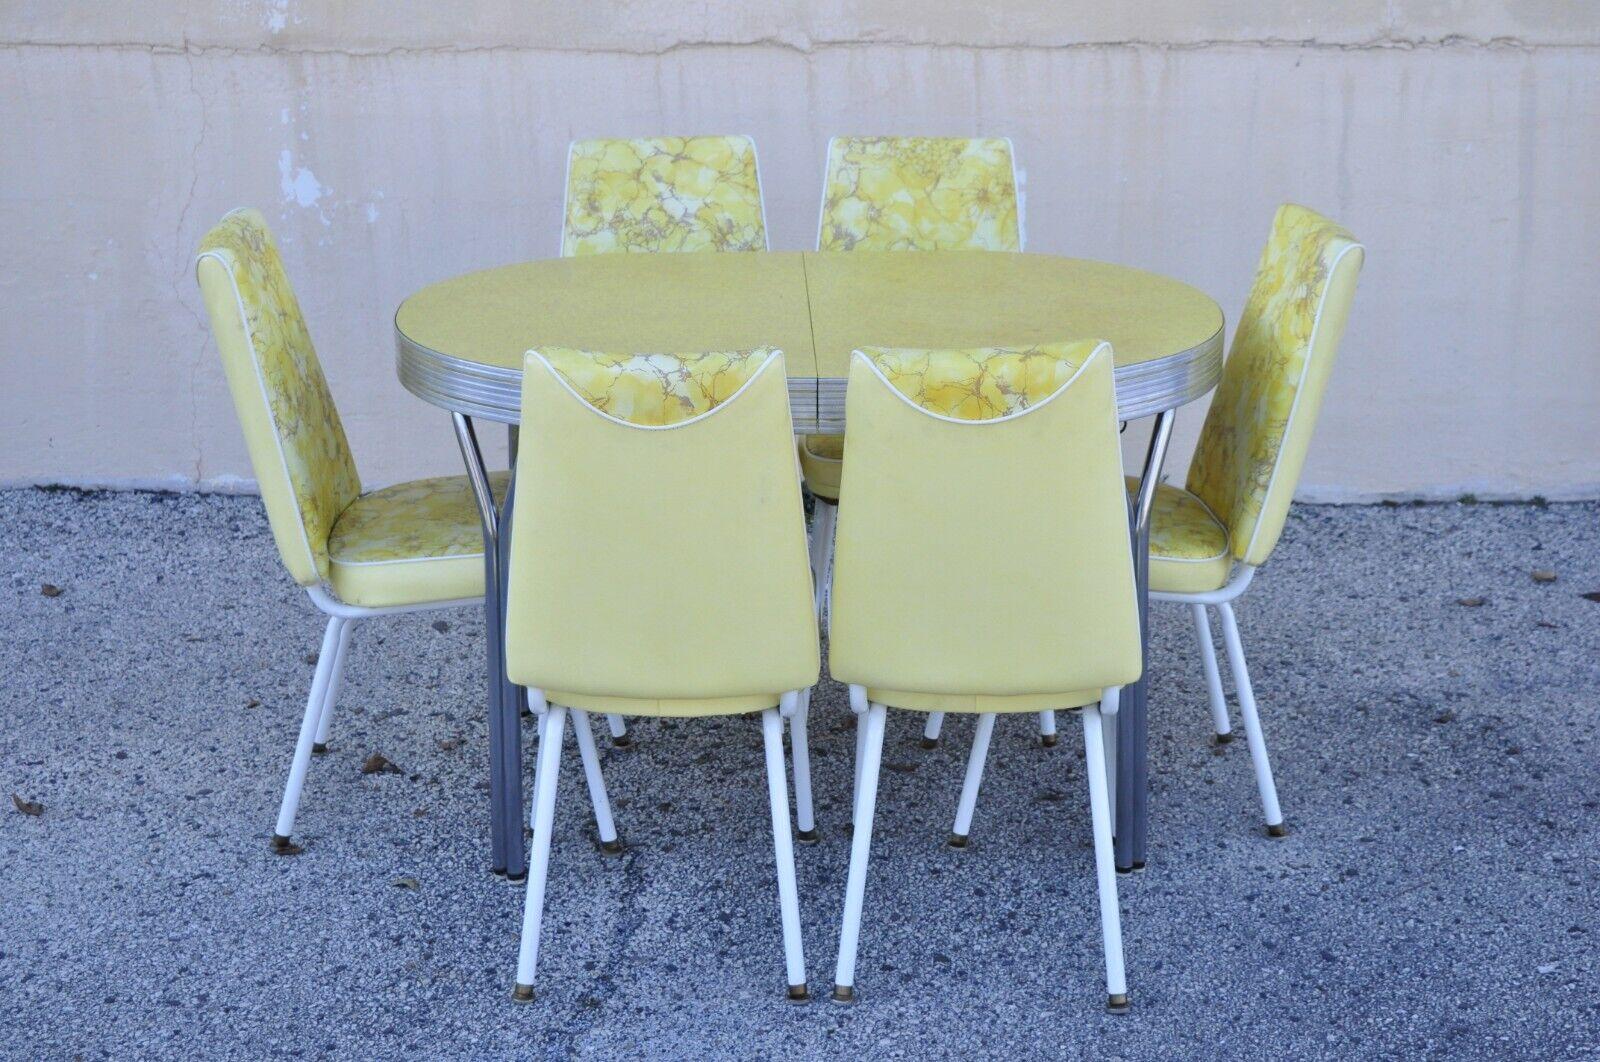 Vintage retro Douglas Furniture Co. yellow formica kitchen dinette set - 7 Pc Set. Item features 6 chairs, (1) table (no leaves), yellow floral print vinyl upholstery, oval formica table with metal legs, original label, very nice vintage set, circa